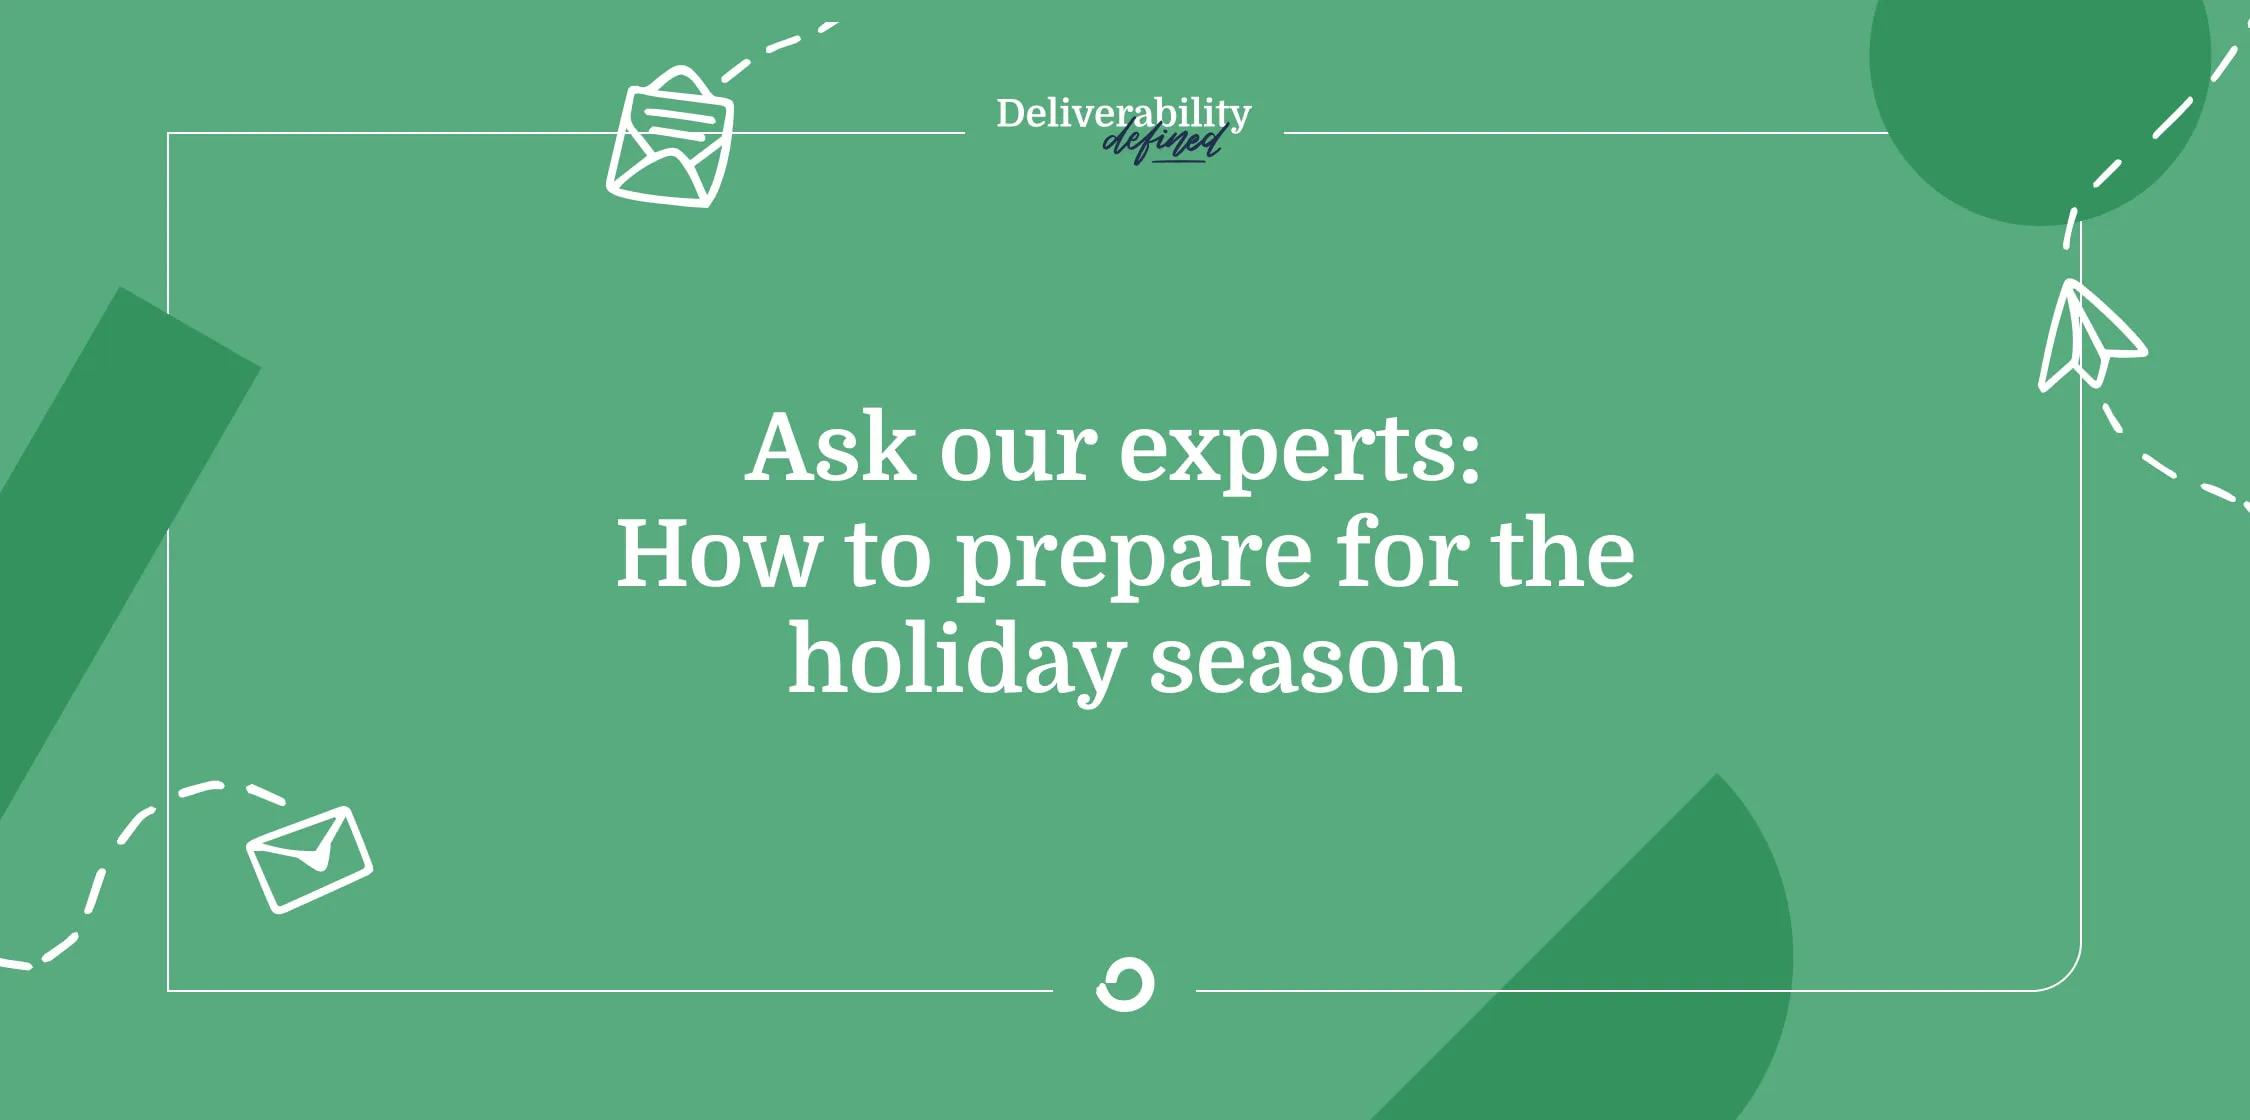 Ask our experts: How to prepare for the holiday season